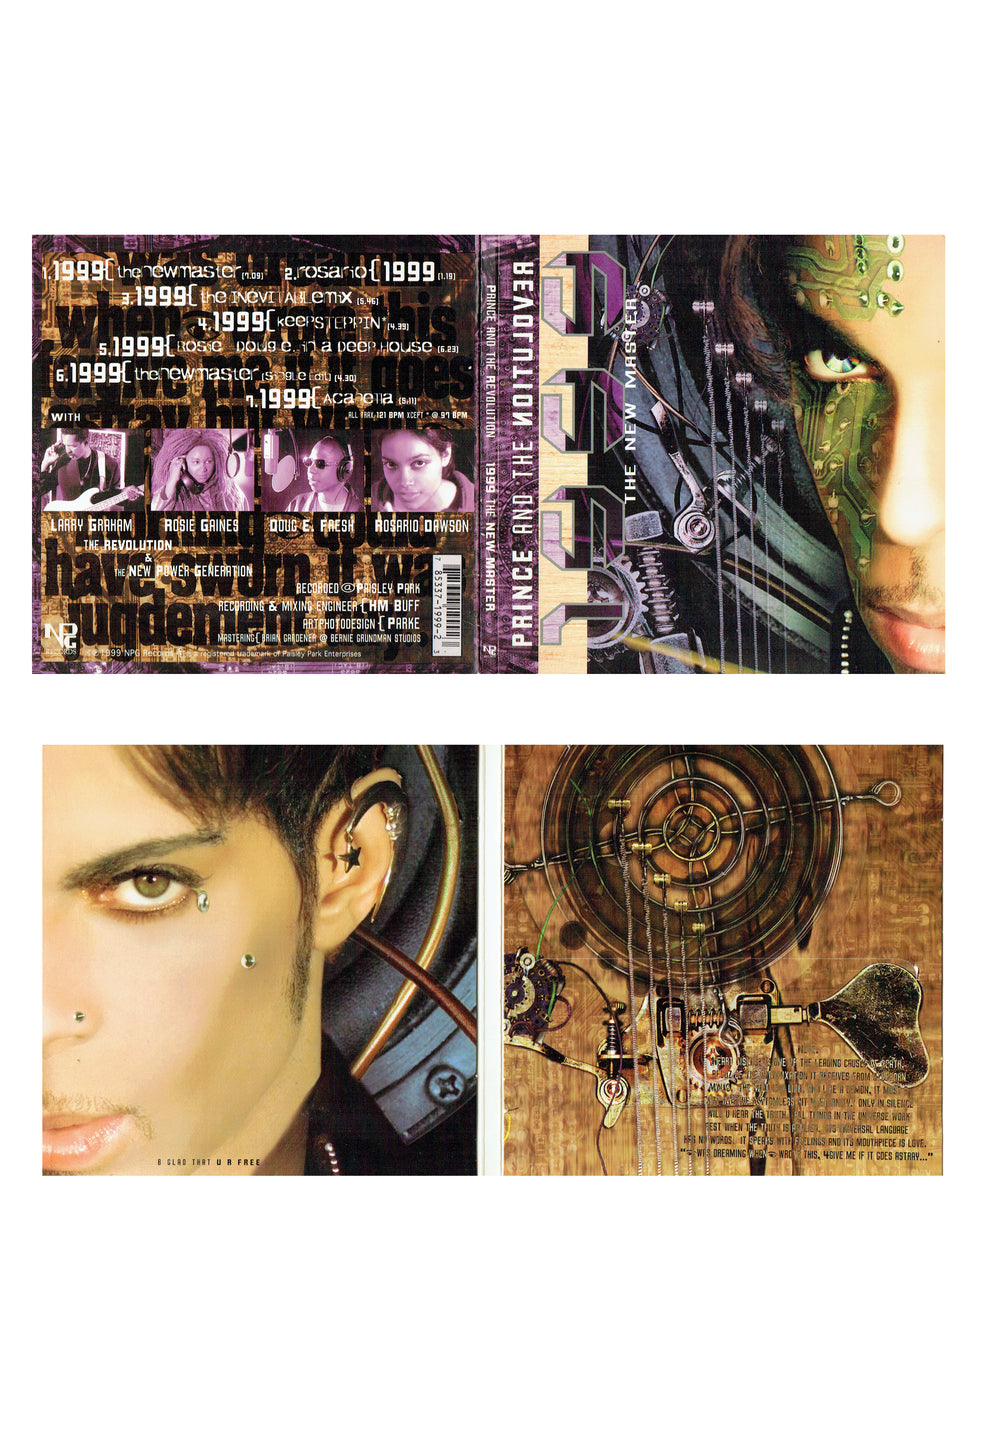 Prince – & The Revolution 1999 The New Master CD Single Maxi EP Preloved: 1999